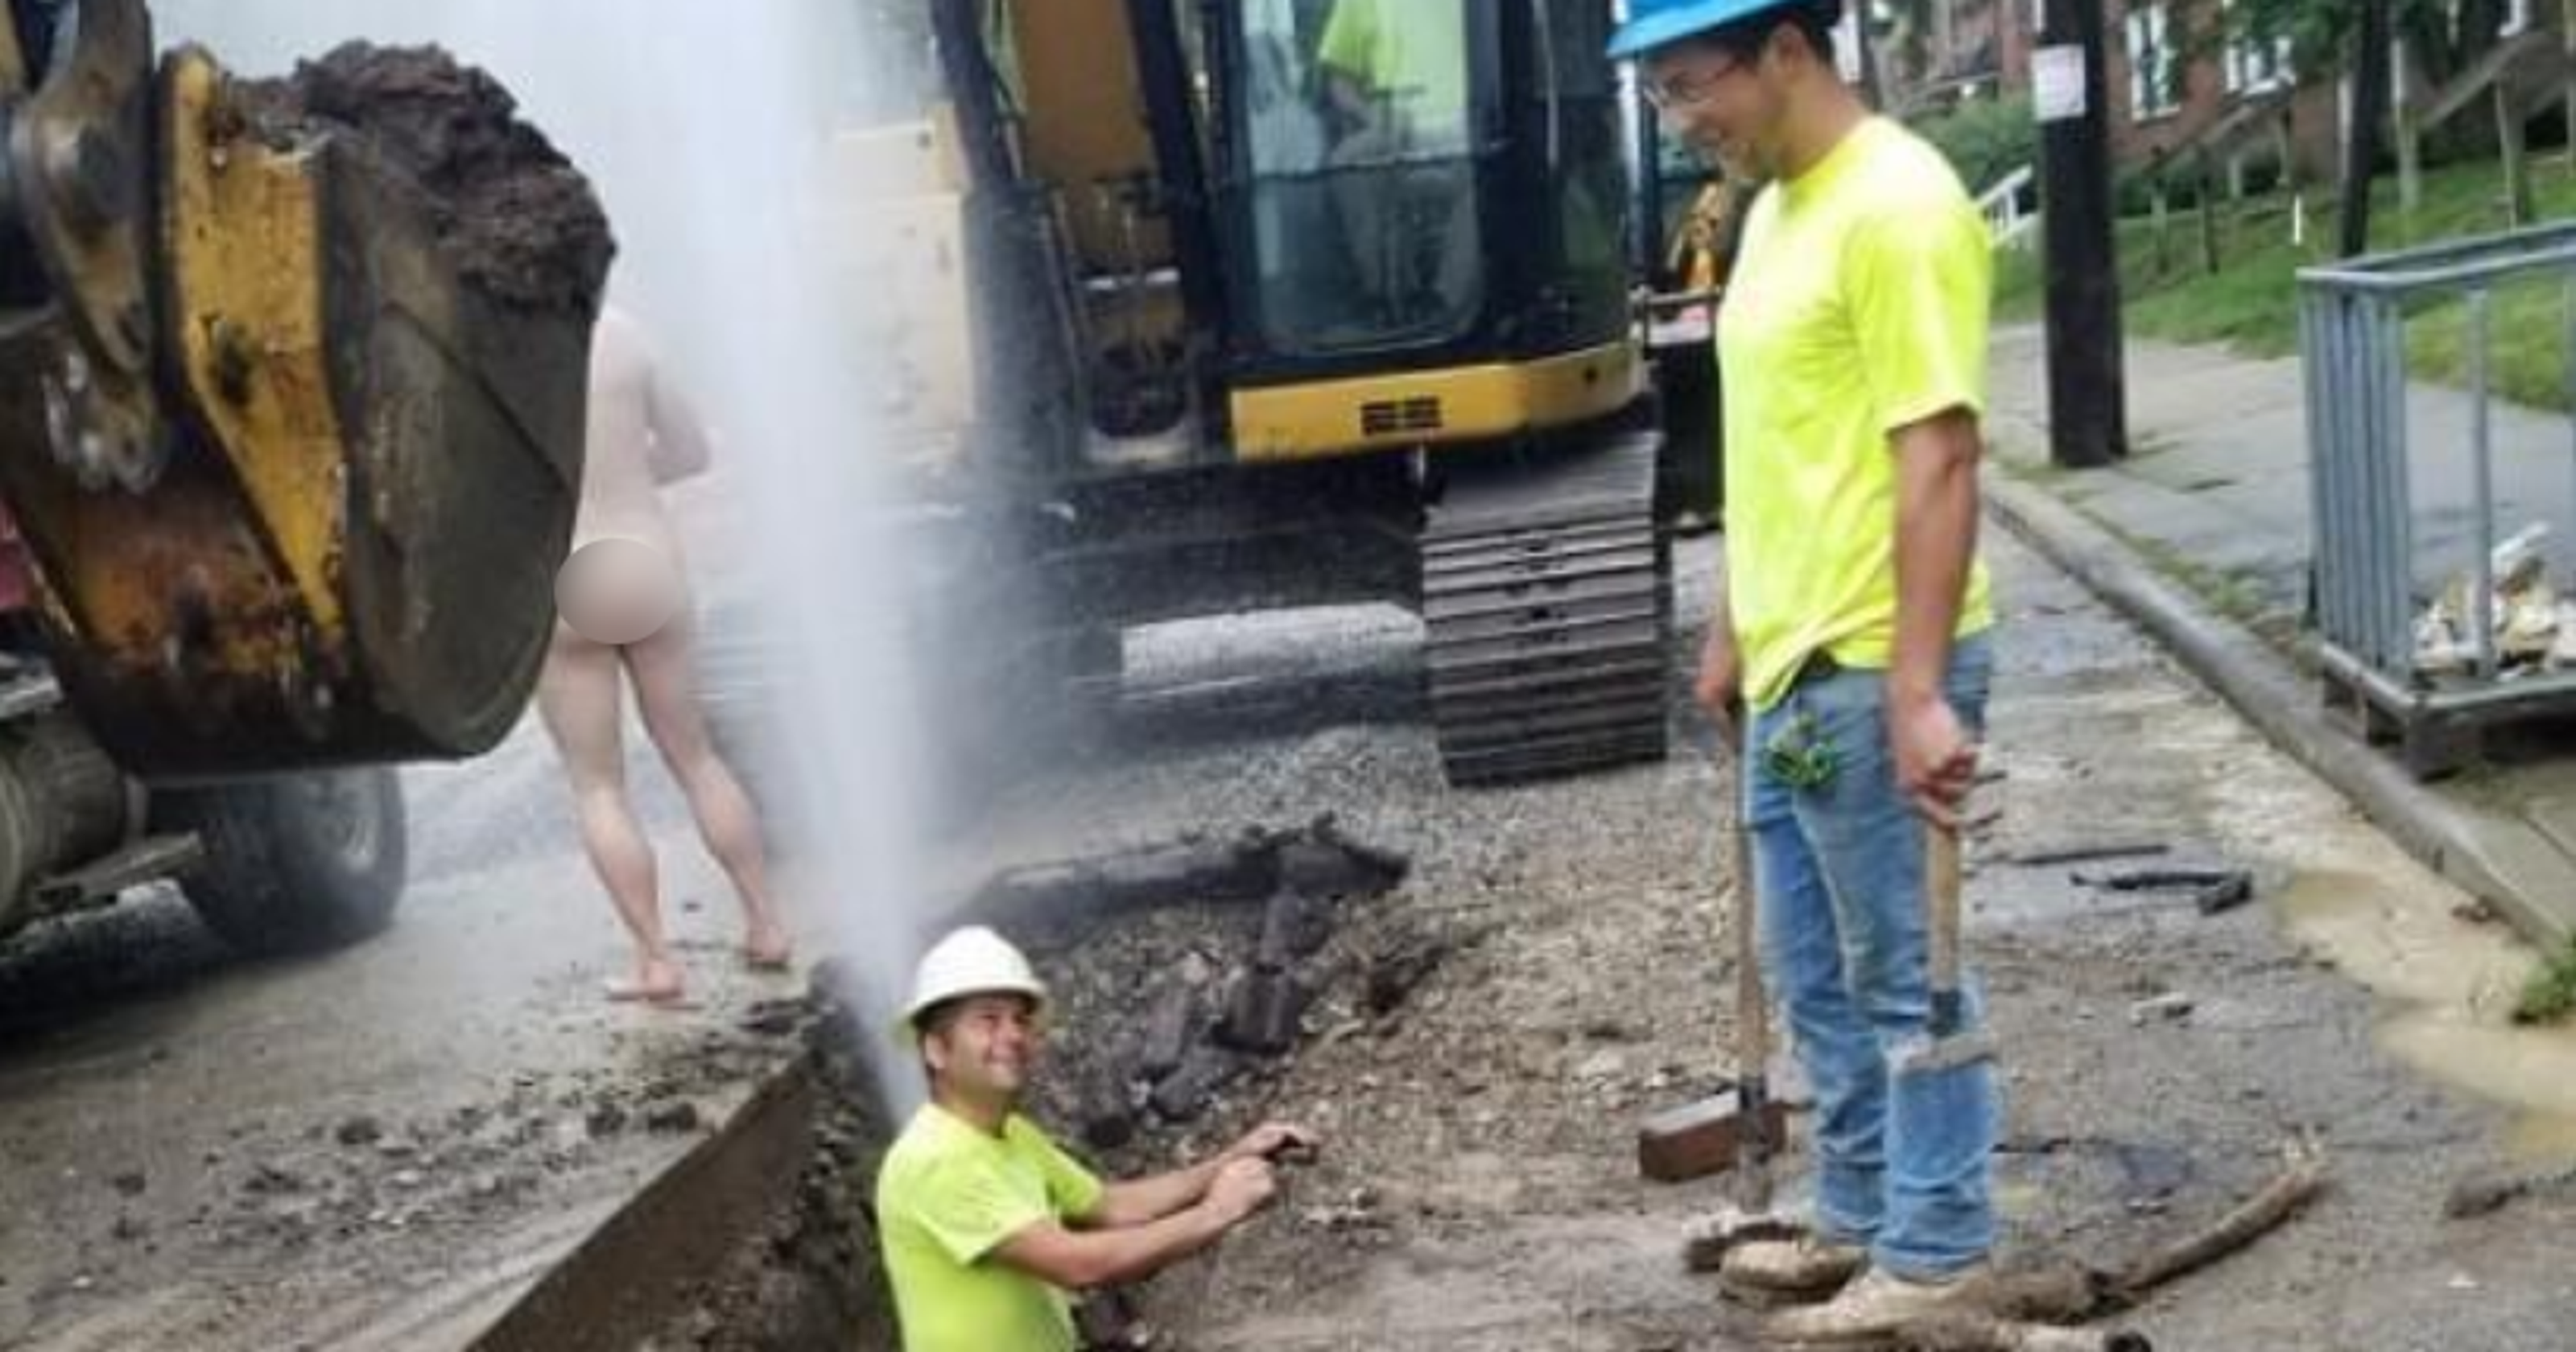 Naked Man Showers Outside In Street After Water Main Breaks In Columbus 